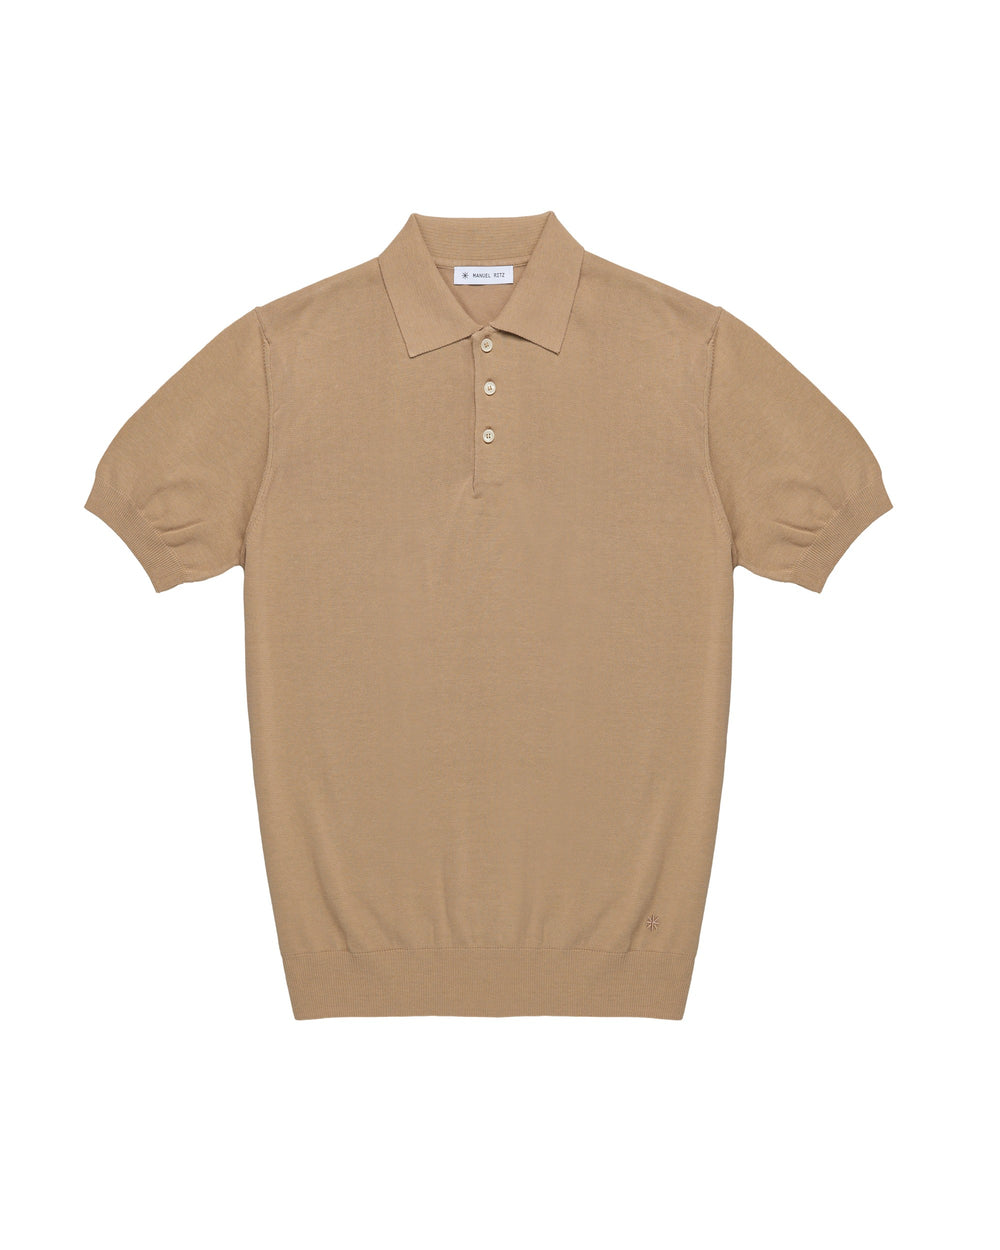 beige cotton short-sleeved polo shirt